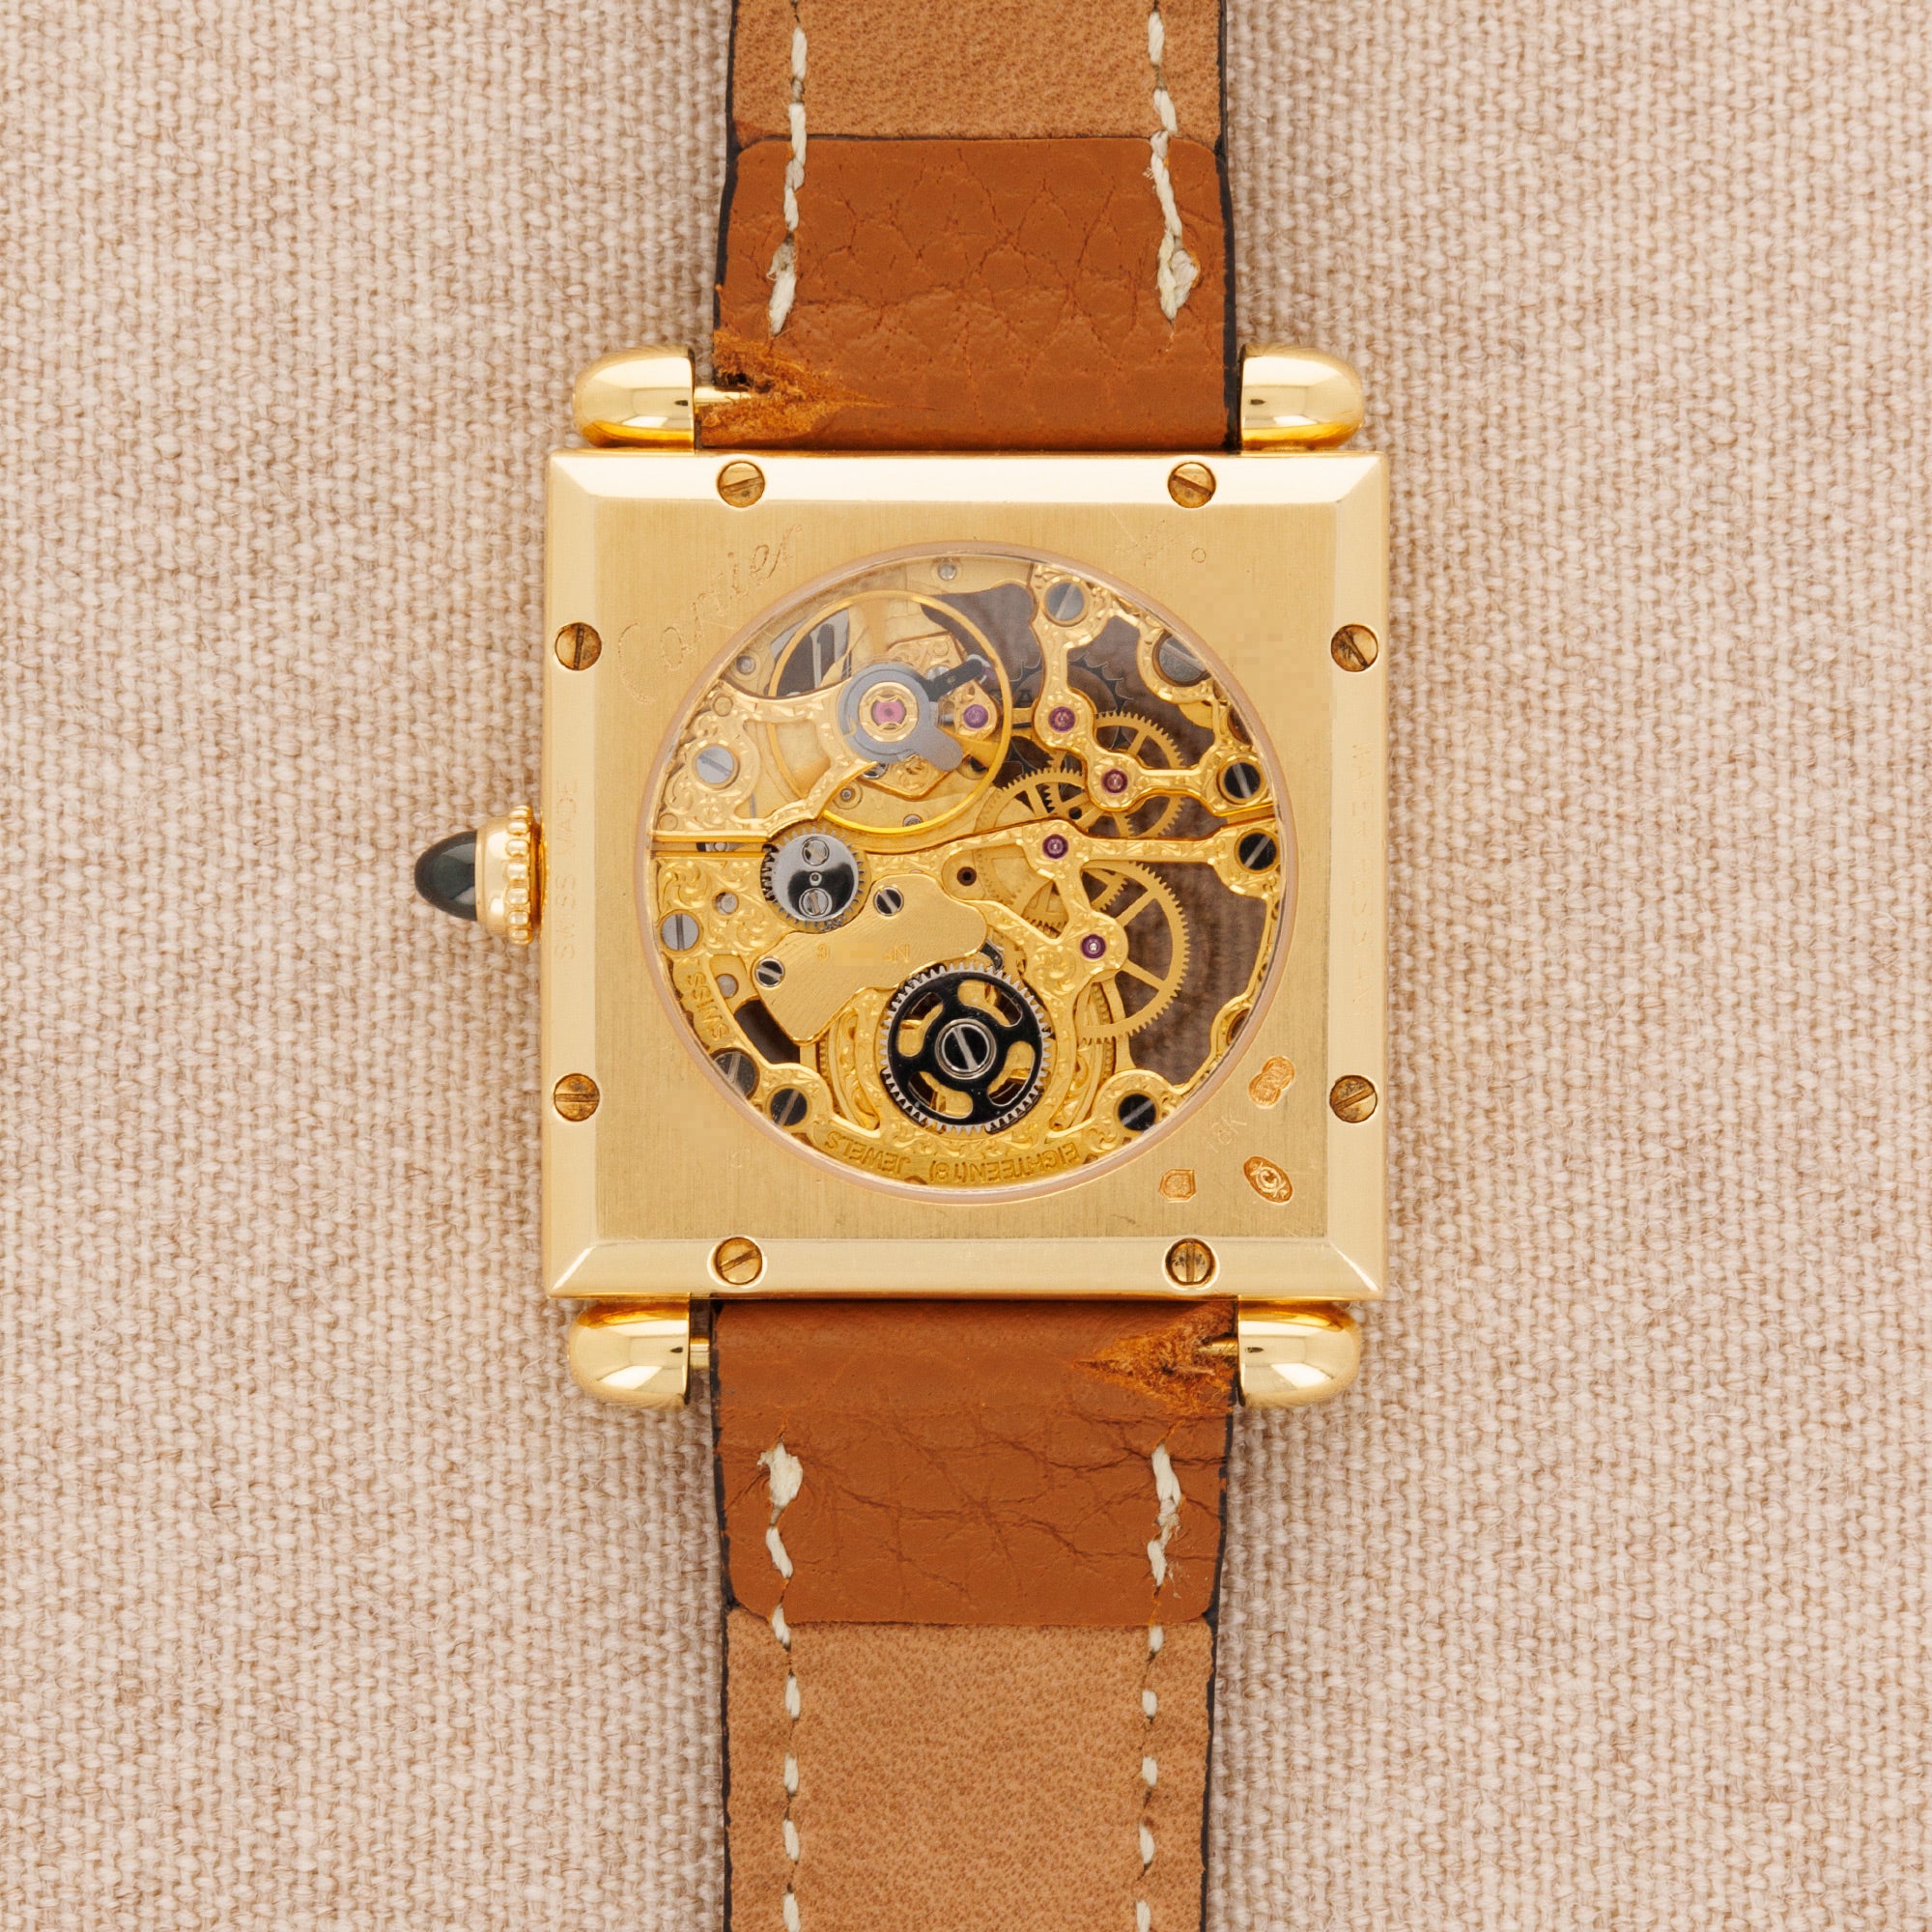 Cartier - Cartier Yellow Gold Tank Obus Carree Watch Ref. 2380, CPCP Edition of 100 Pieces - The Keystone Watches